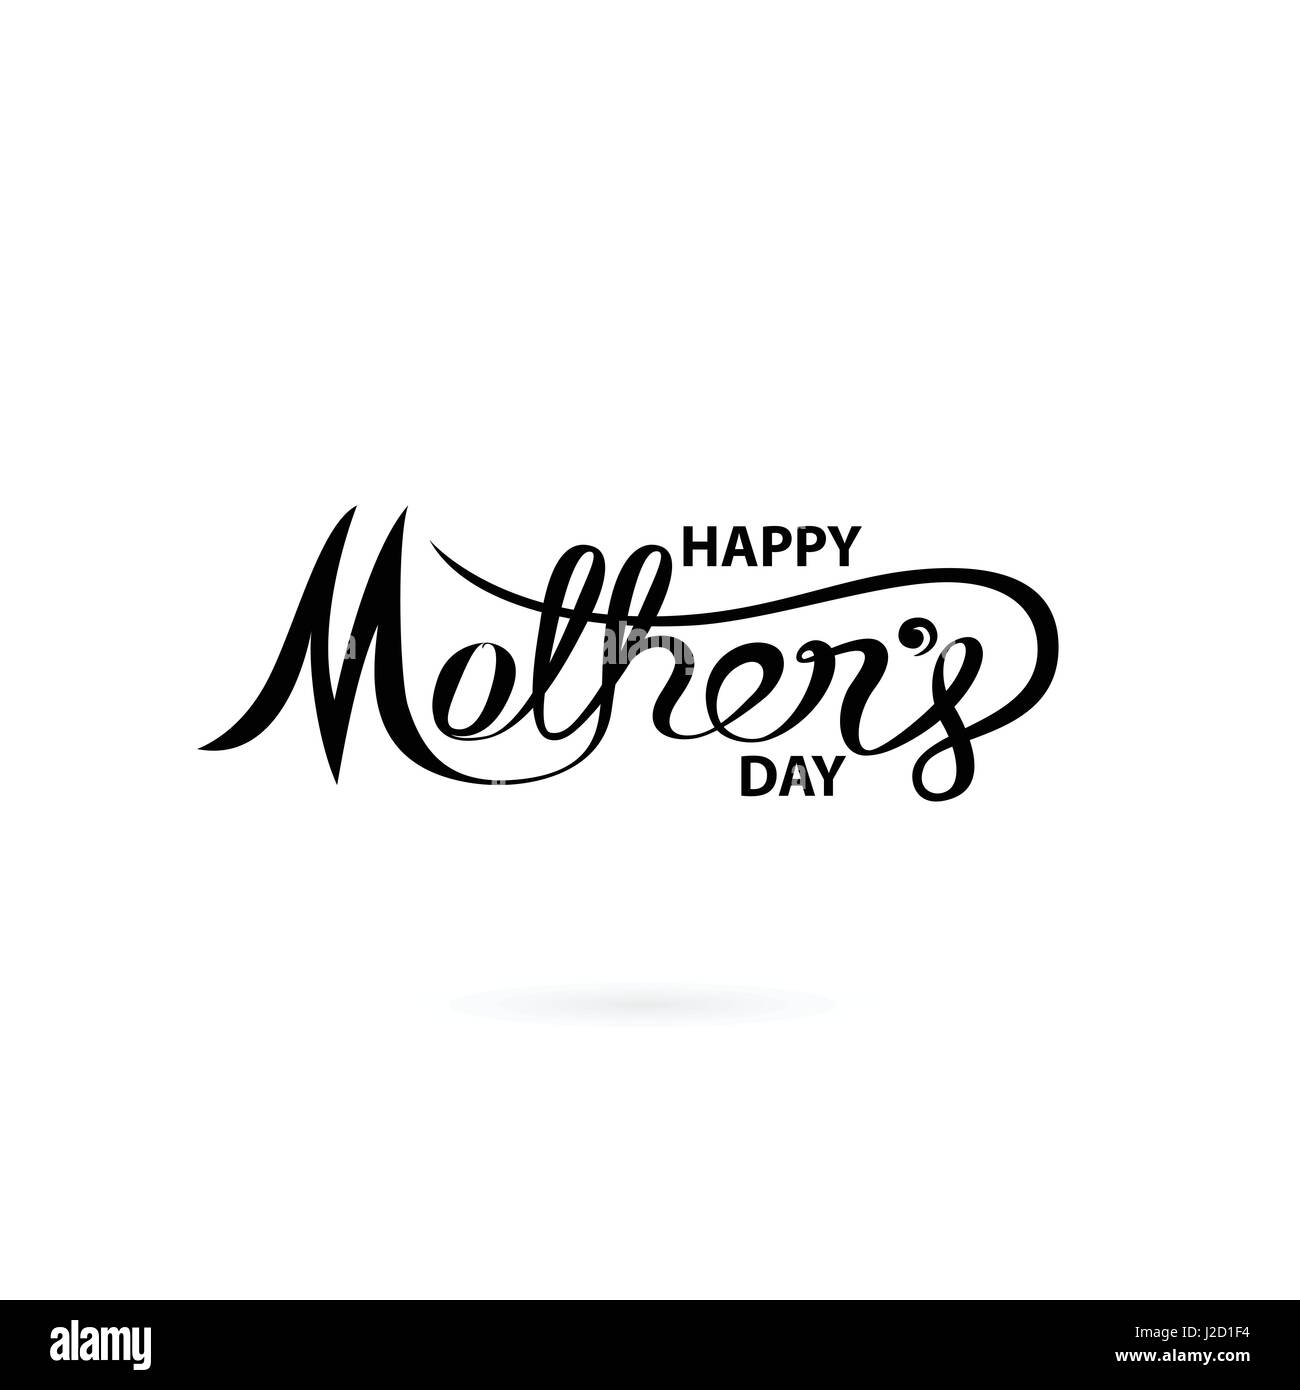 Happy Mother's Day Calligraphy Background.Happy Mother's Day Typographical Design Elements.Vector illustration Stock Vector